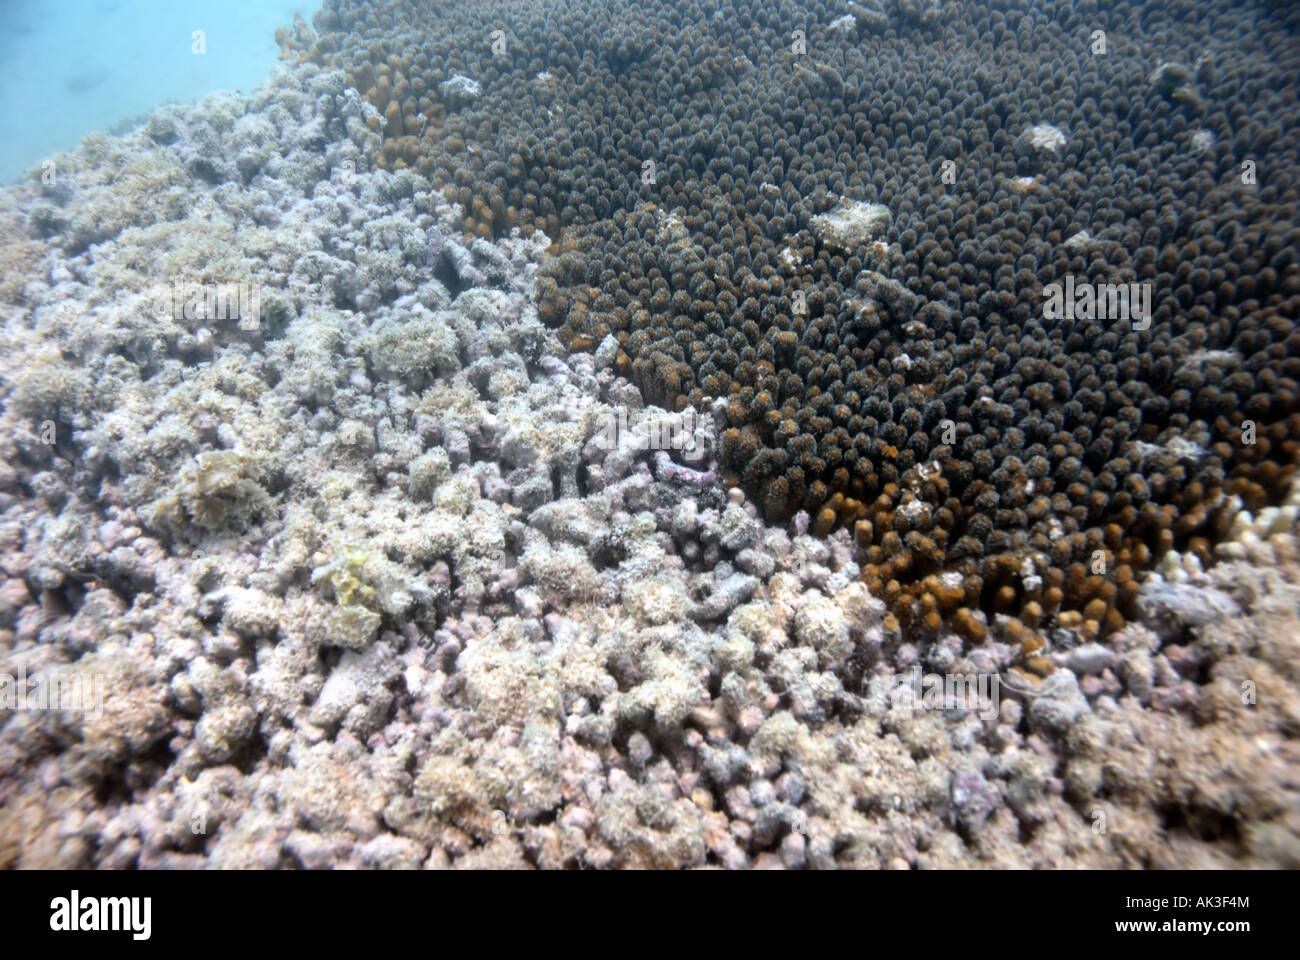 Coral dying due to increased rates of sedimentation Stock Photo